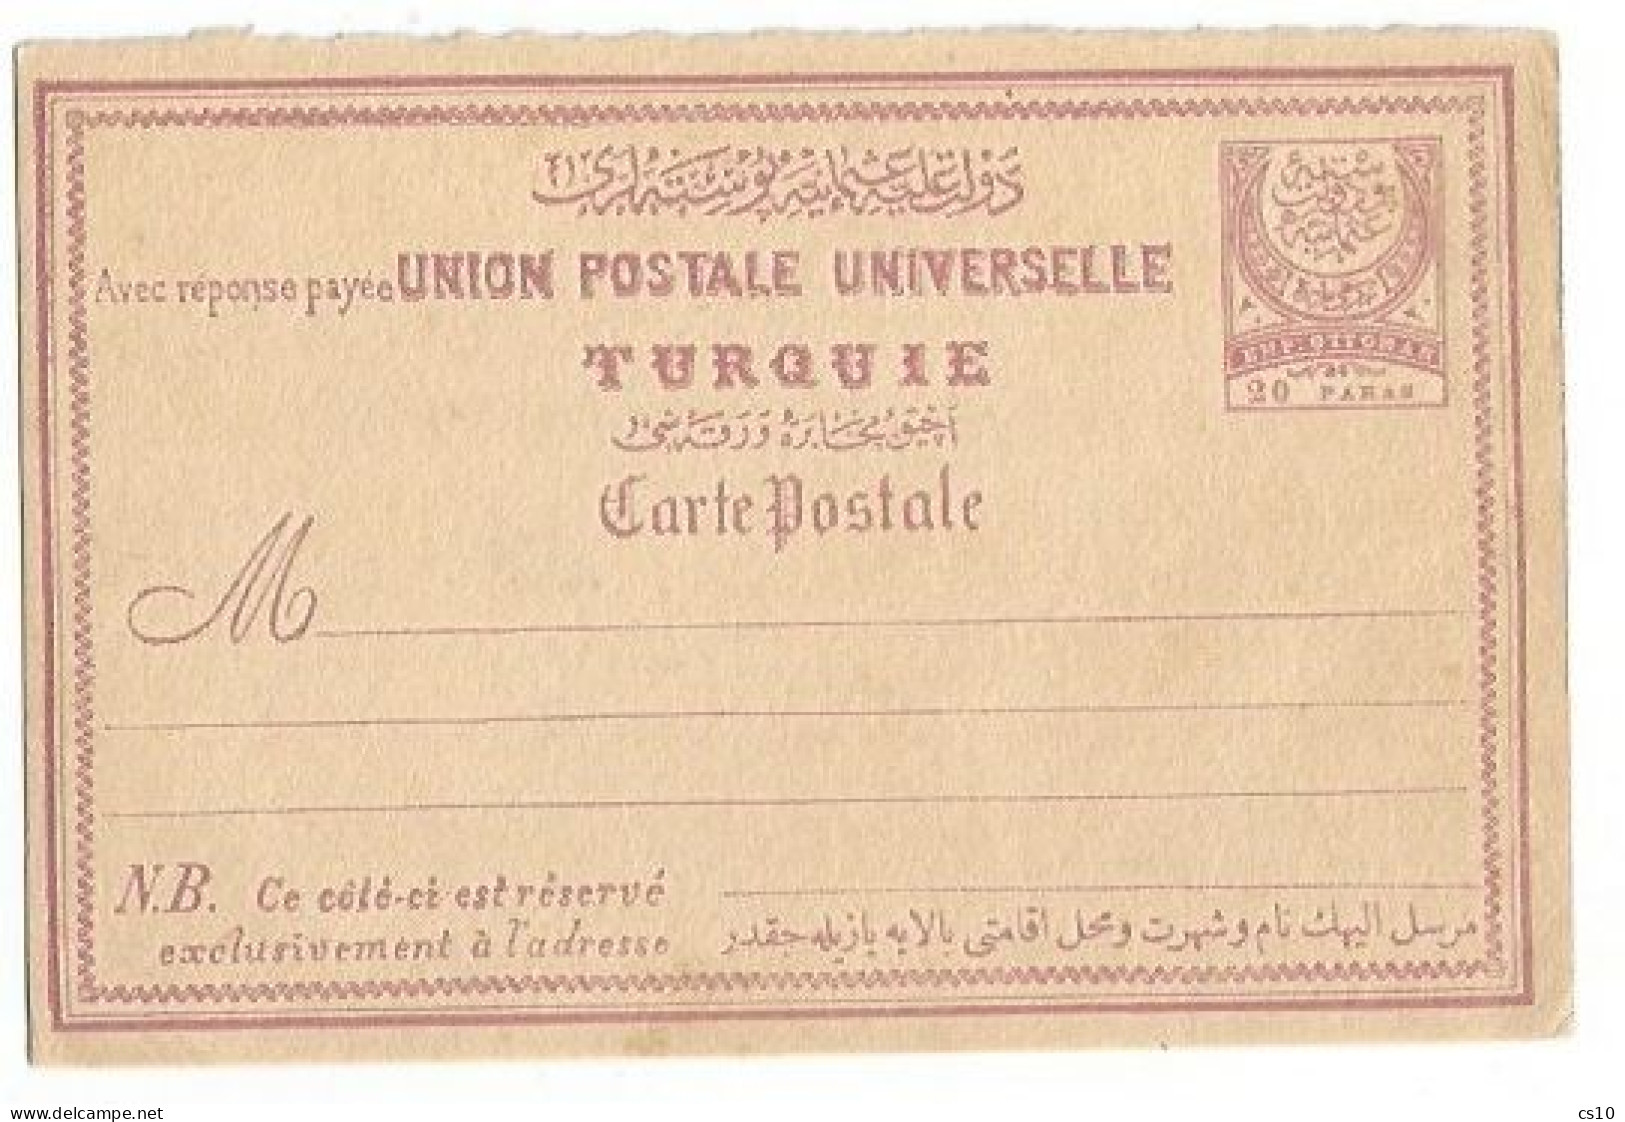 Turkey Ottoman Empire PSC Stationery Card 20paras (Only Question Part) - Unused - Enteros Postales